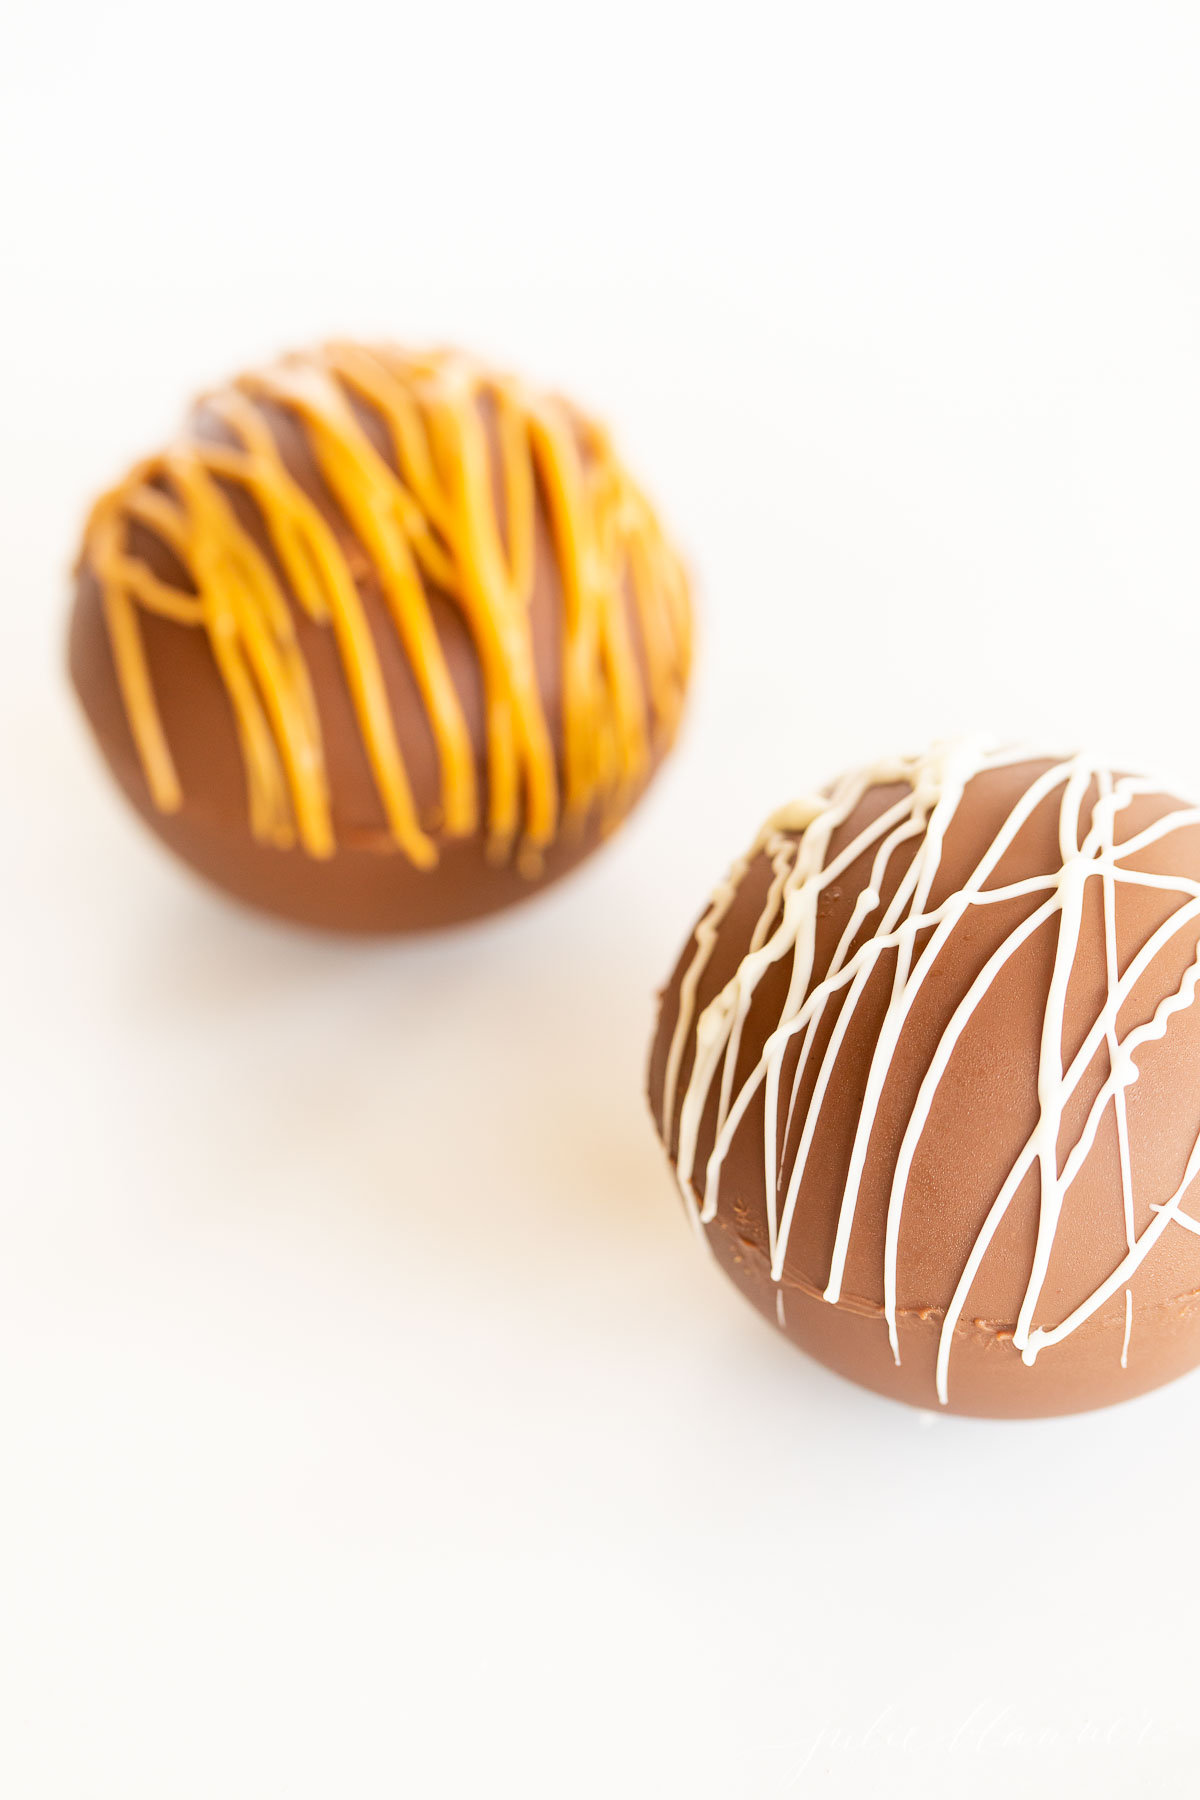 Two chocolate easter eggs with icing on them.